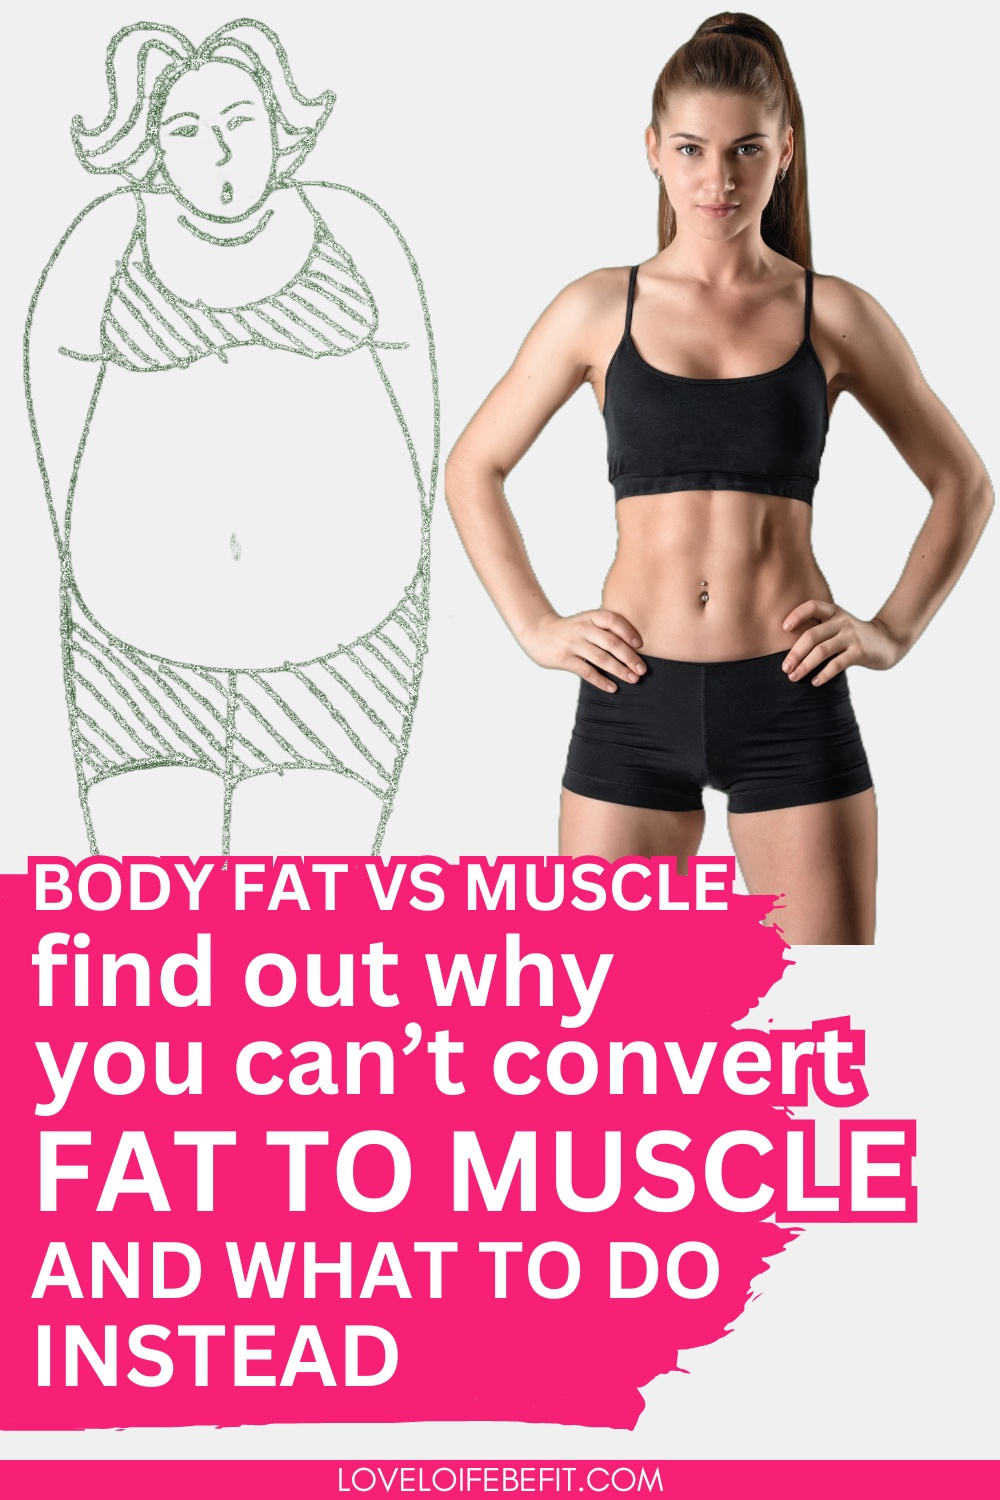 a muscular woman can weigh the same as an obese woman